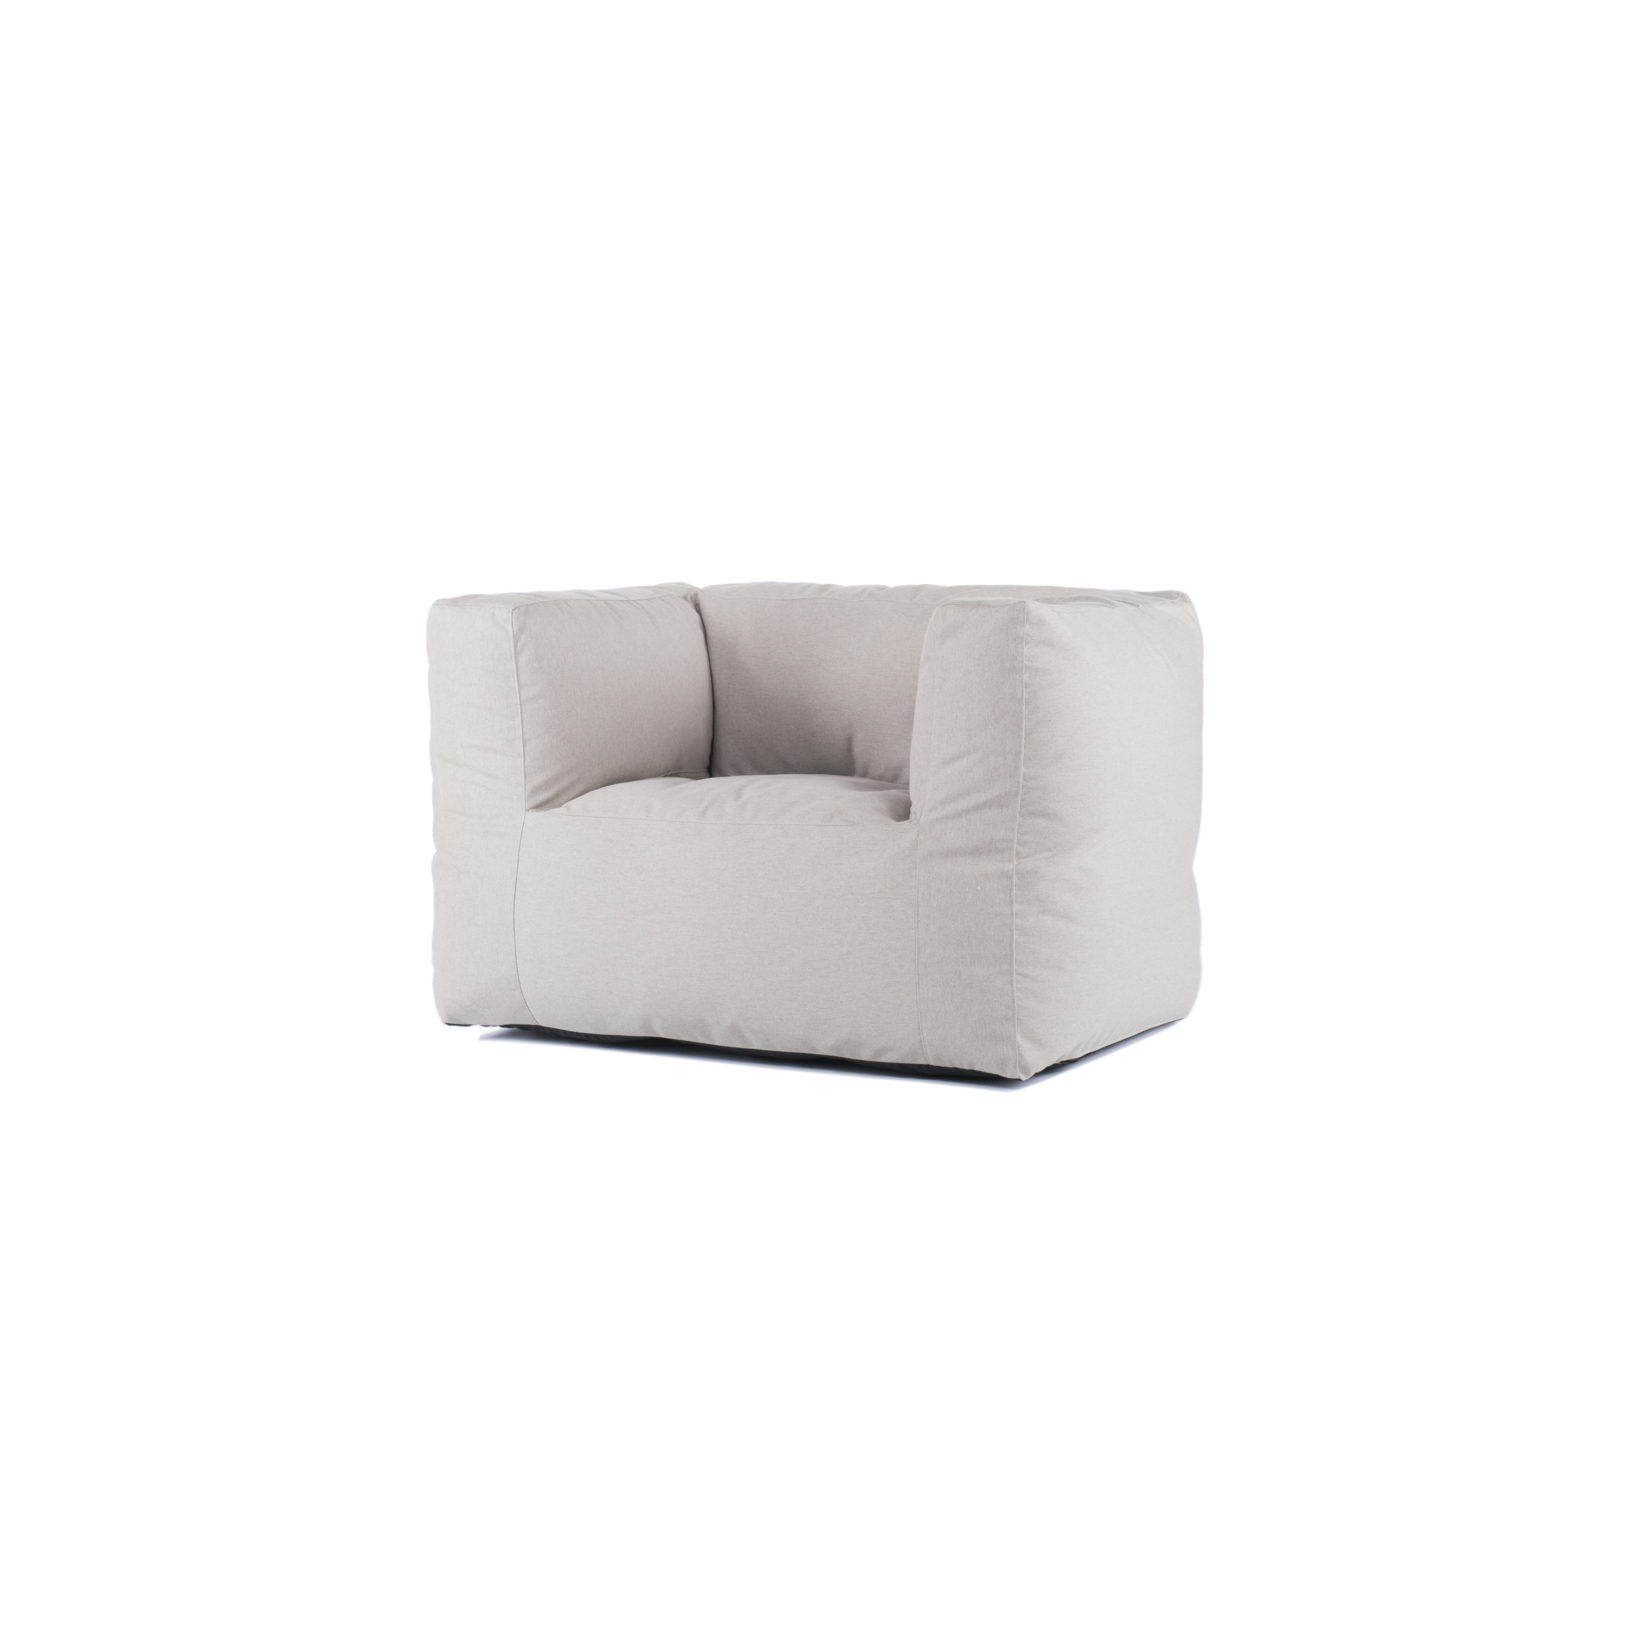 Bryck Bryck Chair | One seat | SMOOTH COLLECTION